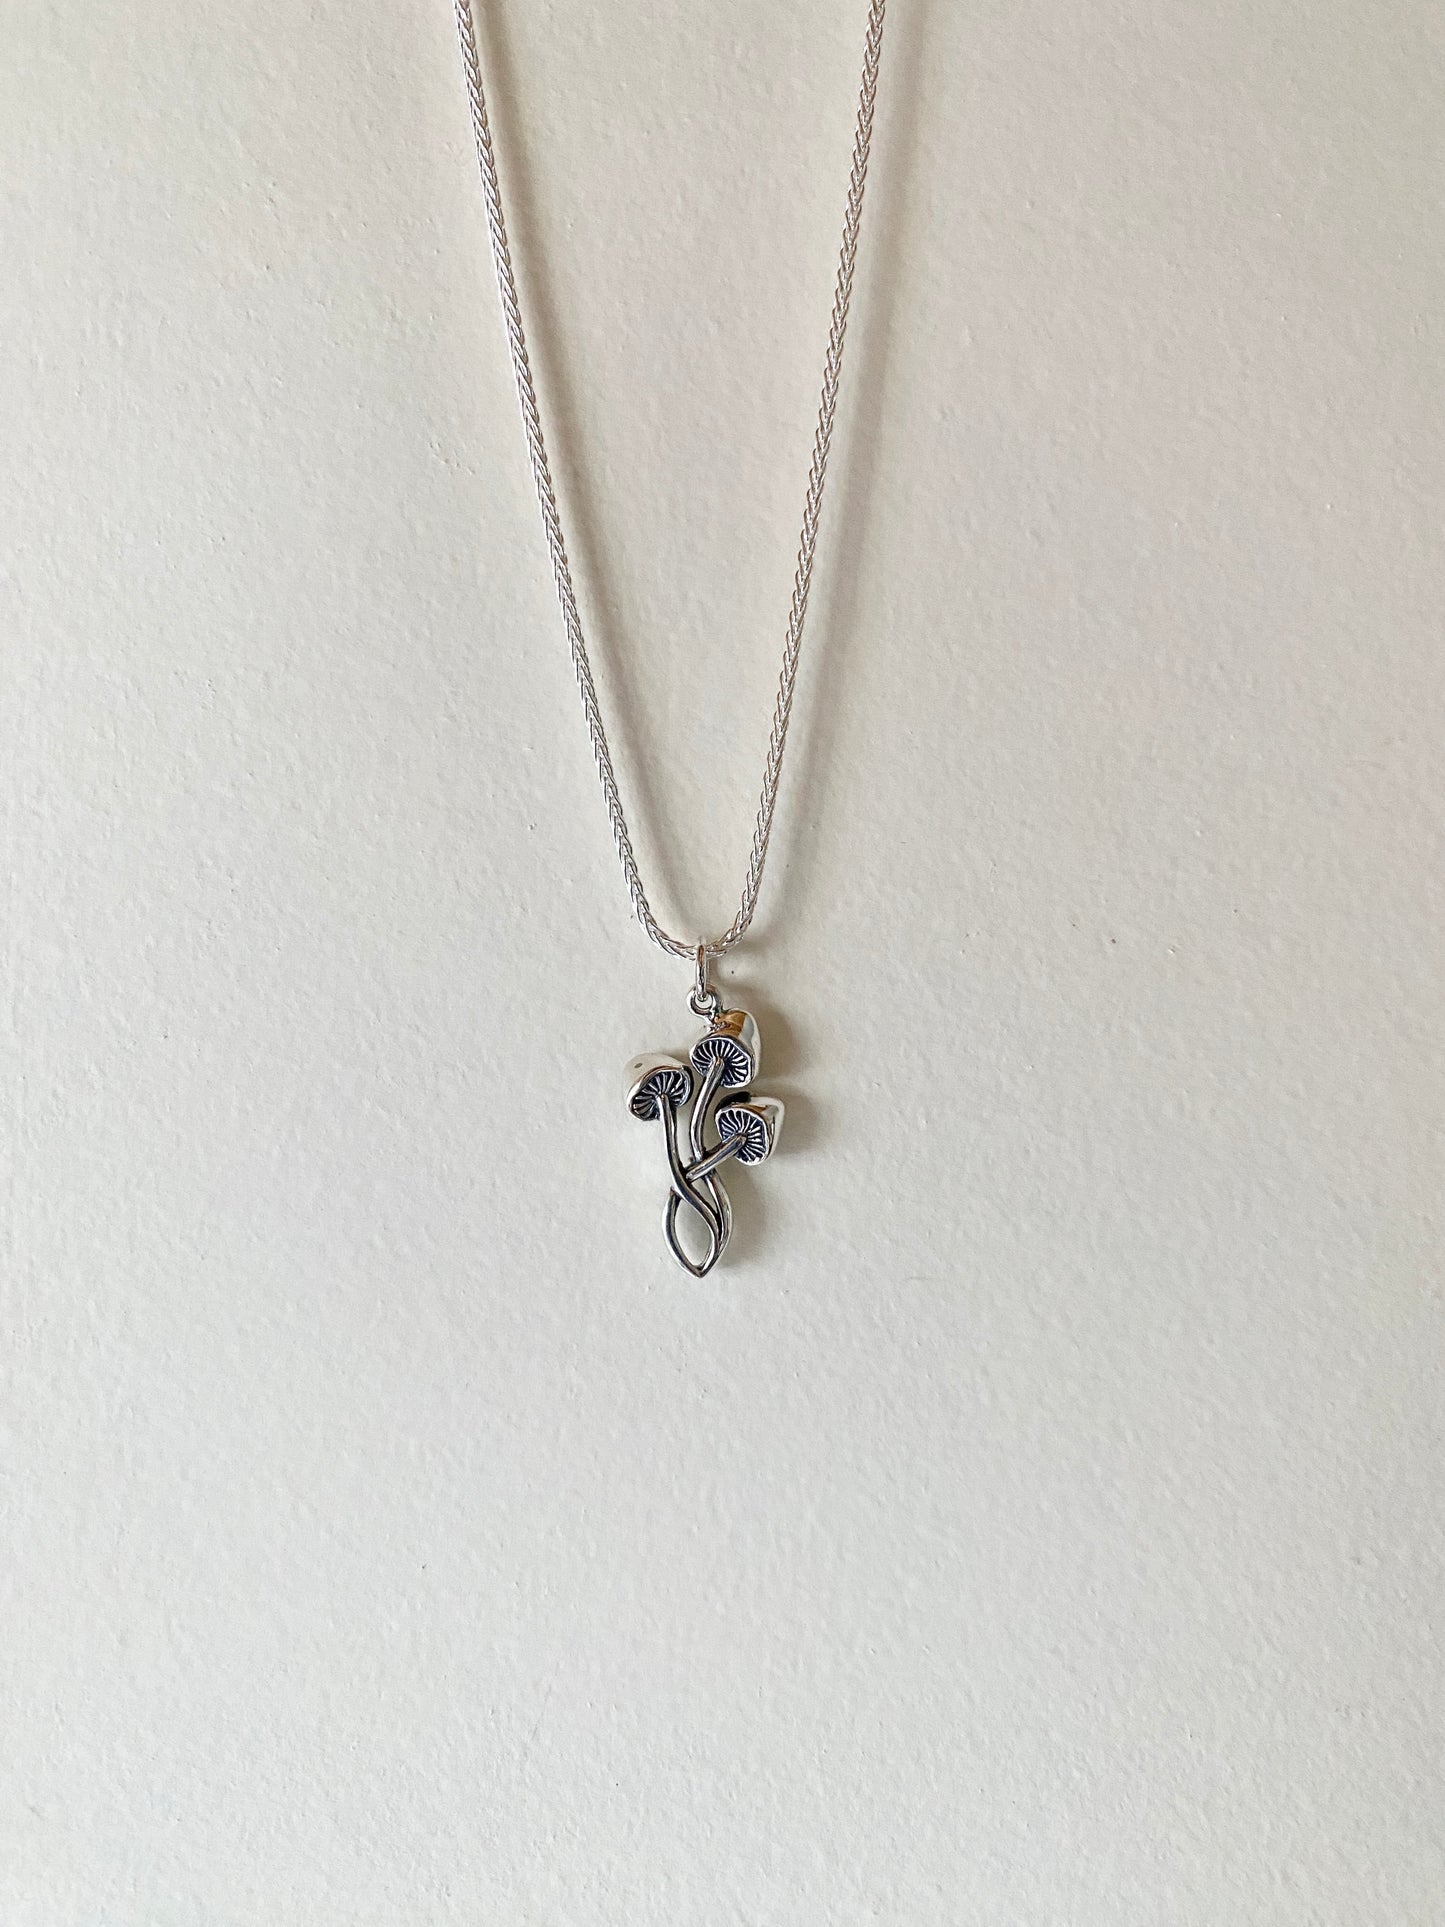 Mushroom Cluster Charm Necklace in .925 Sterling Silver